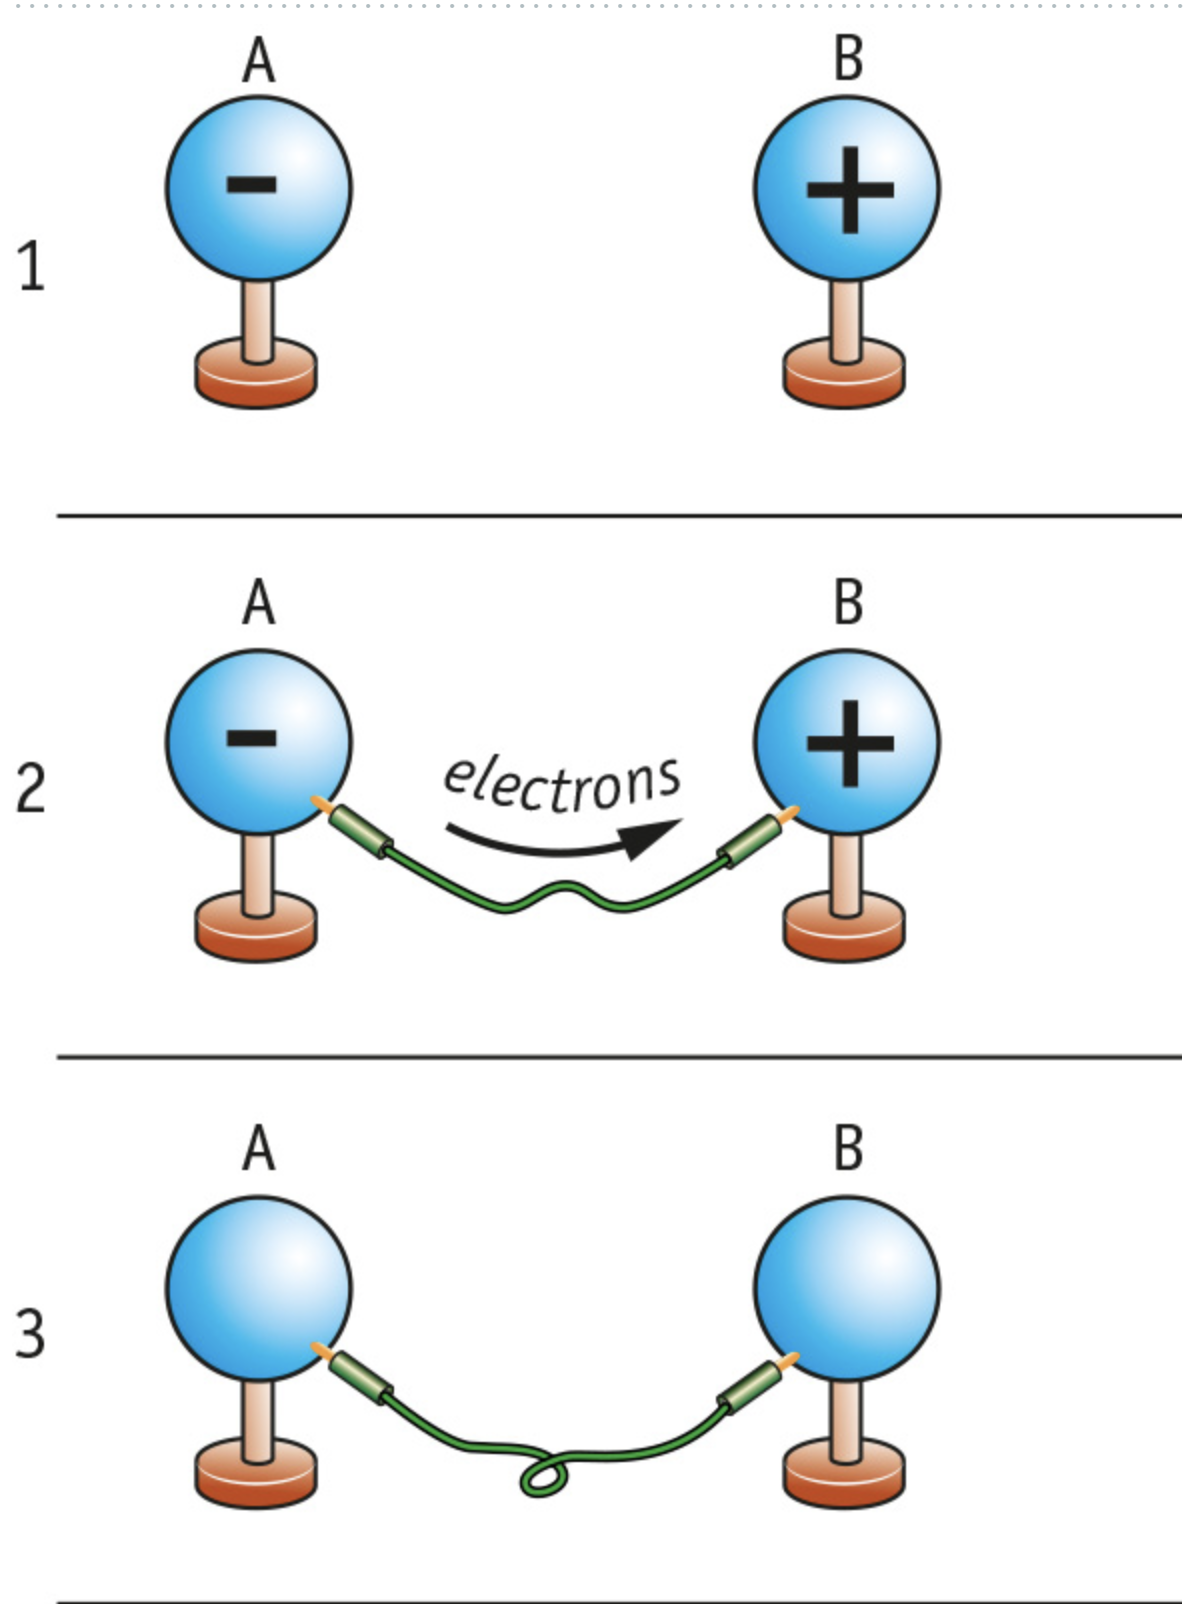 Electrons move from minus to plus